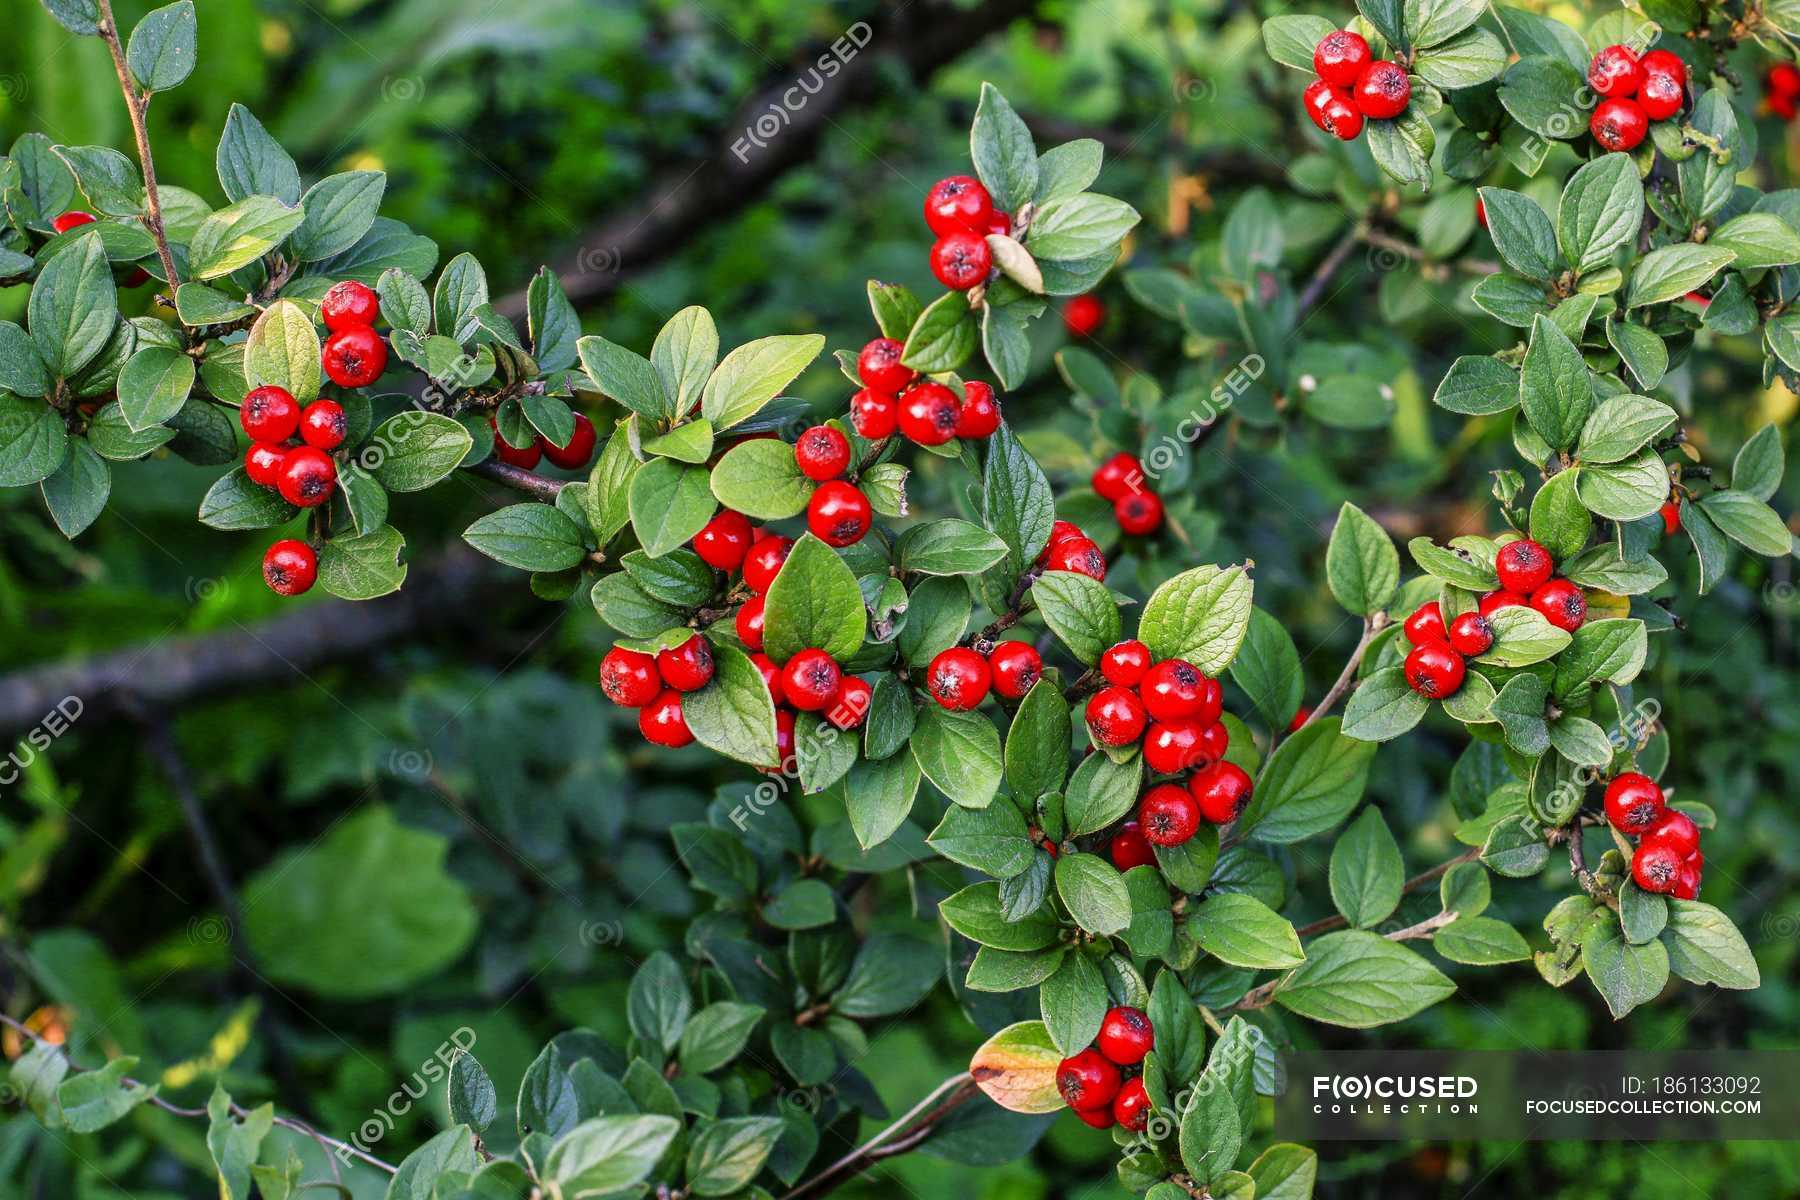 Green bush with red berries in garden. — Stock Photo | #186133092